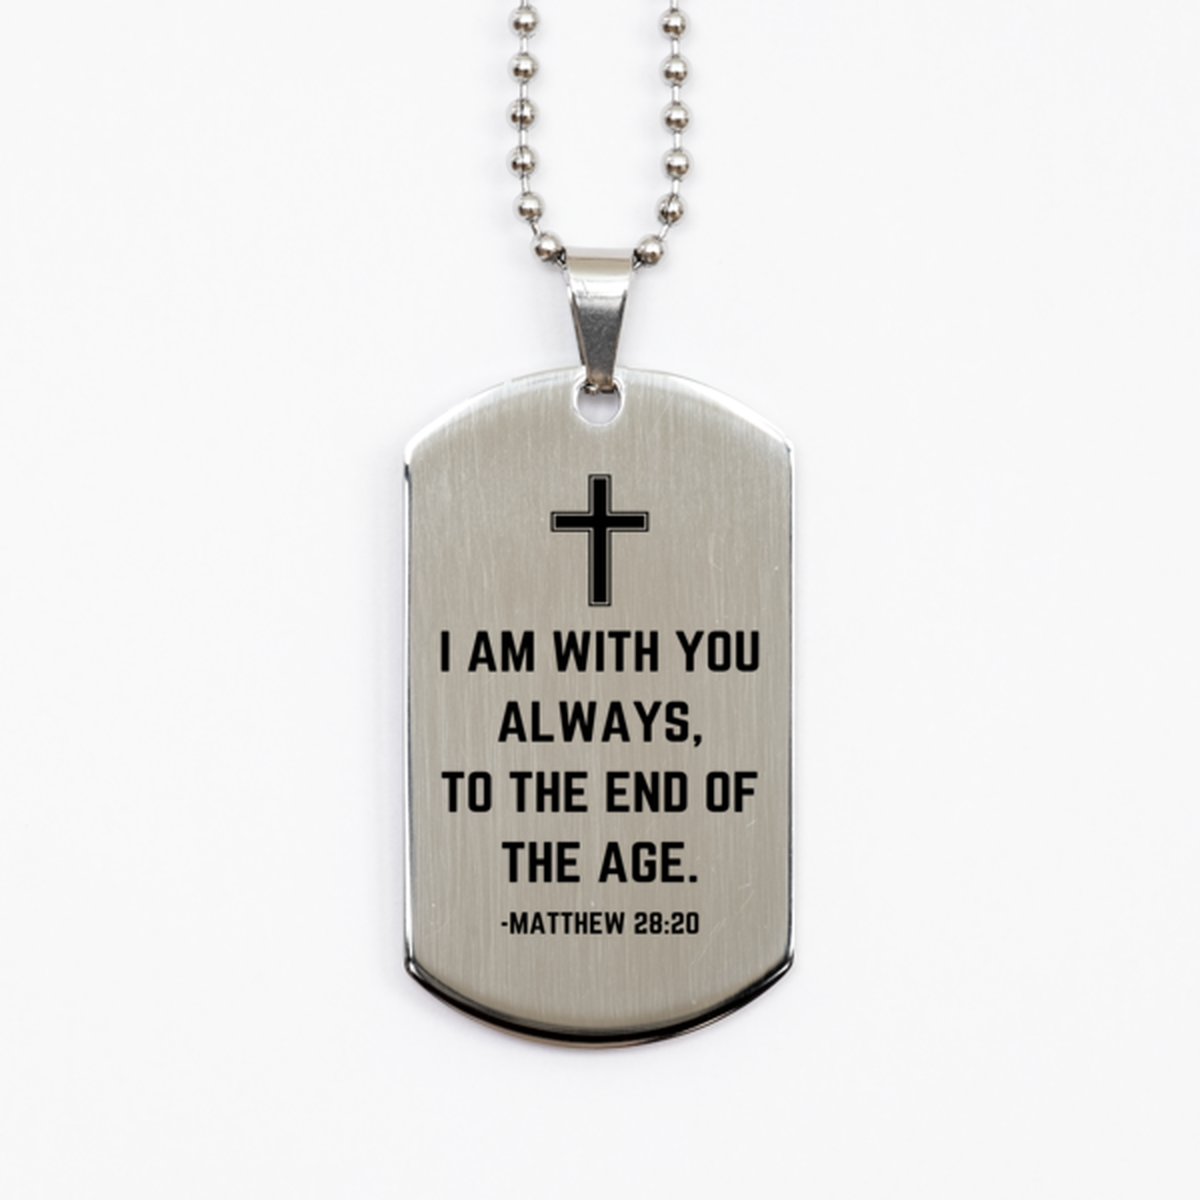 Baptism Gifts For Teenage Boys Girls, Christian Bible Verse Silver Dog Tag, I am with you always, Confirmation Gifts, Bible Verse Necklace for Son, Godson, Grandson, Nephew